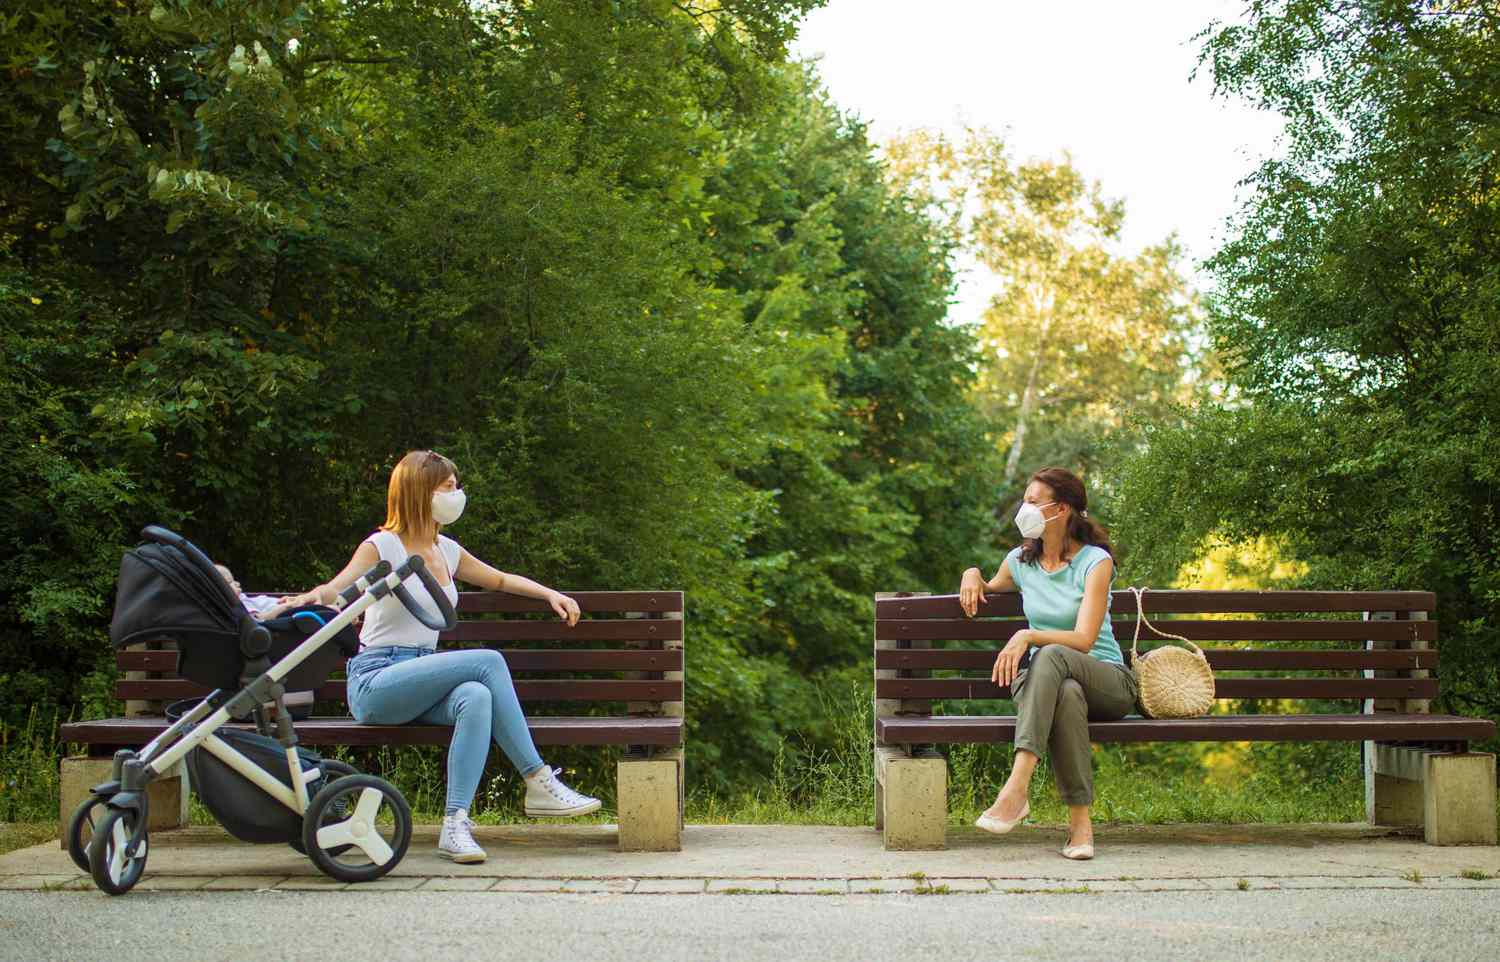 An image of two women sitting in a park with masks on.